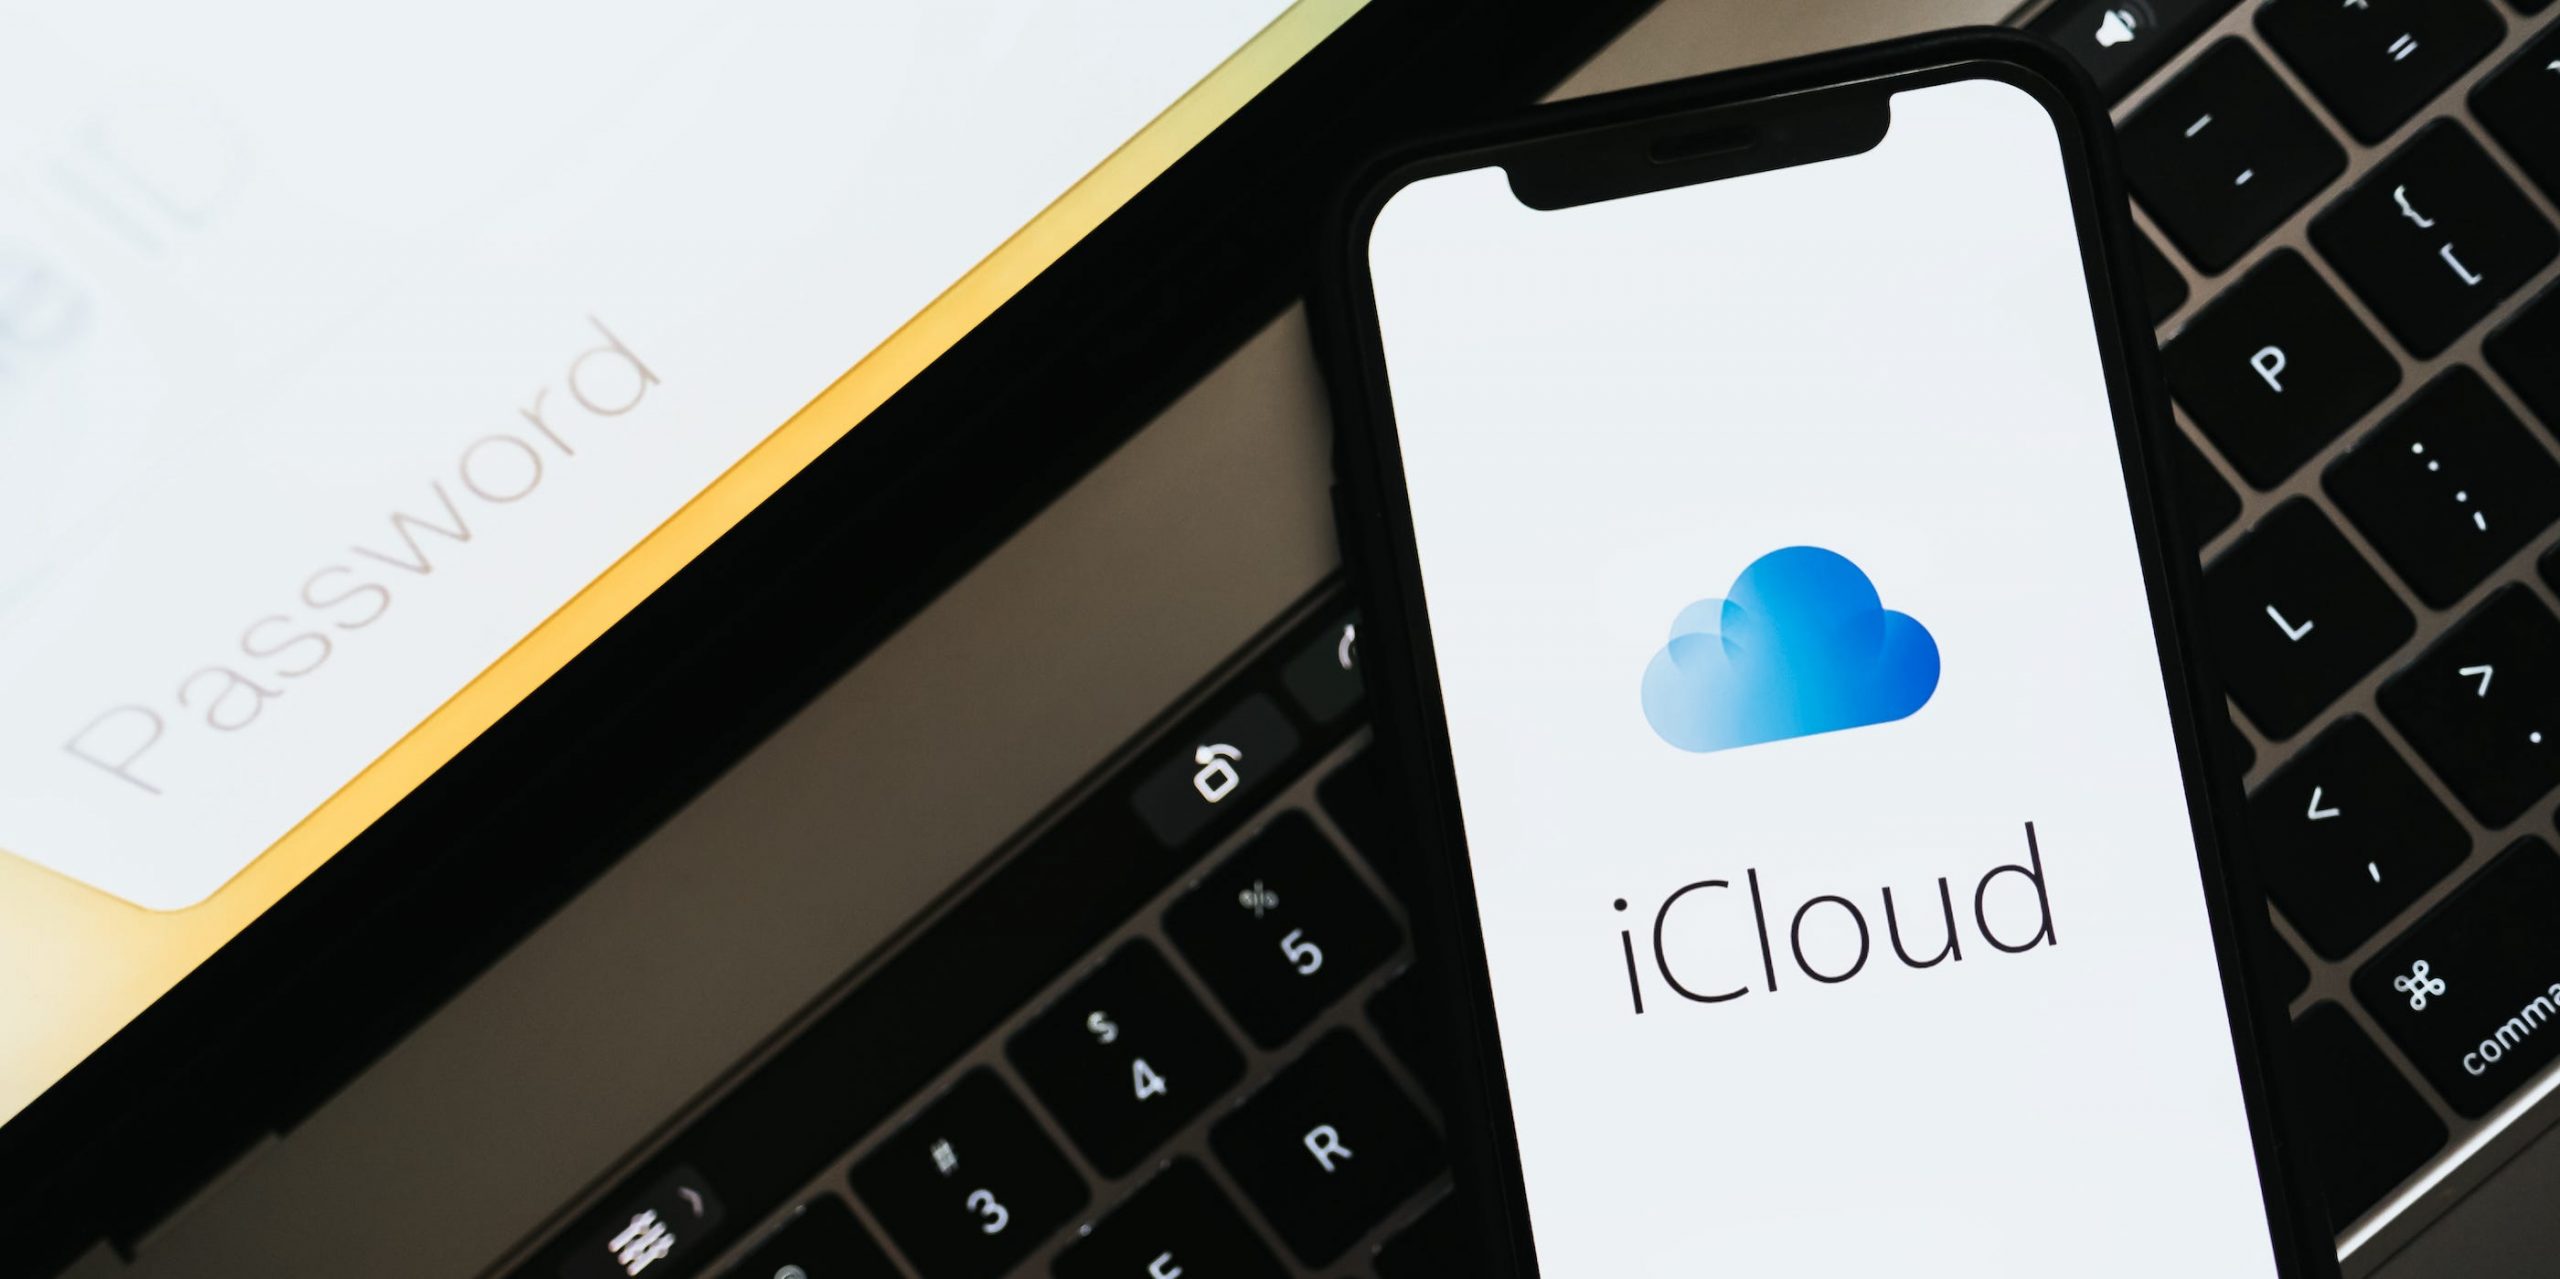 An iPhone displaying the iCloud logo, laid on top of a MacBook.